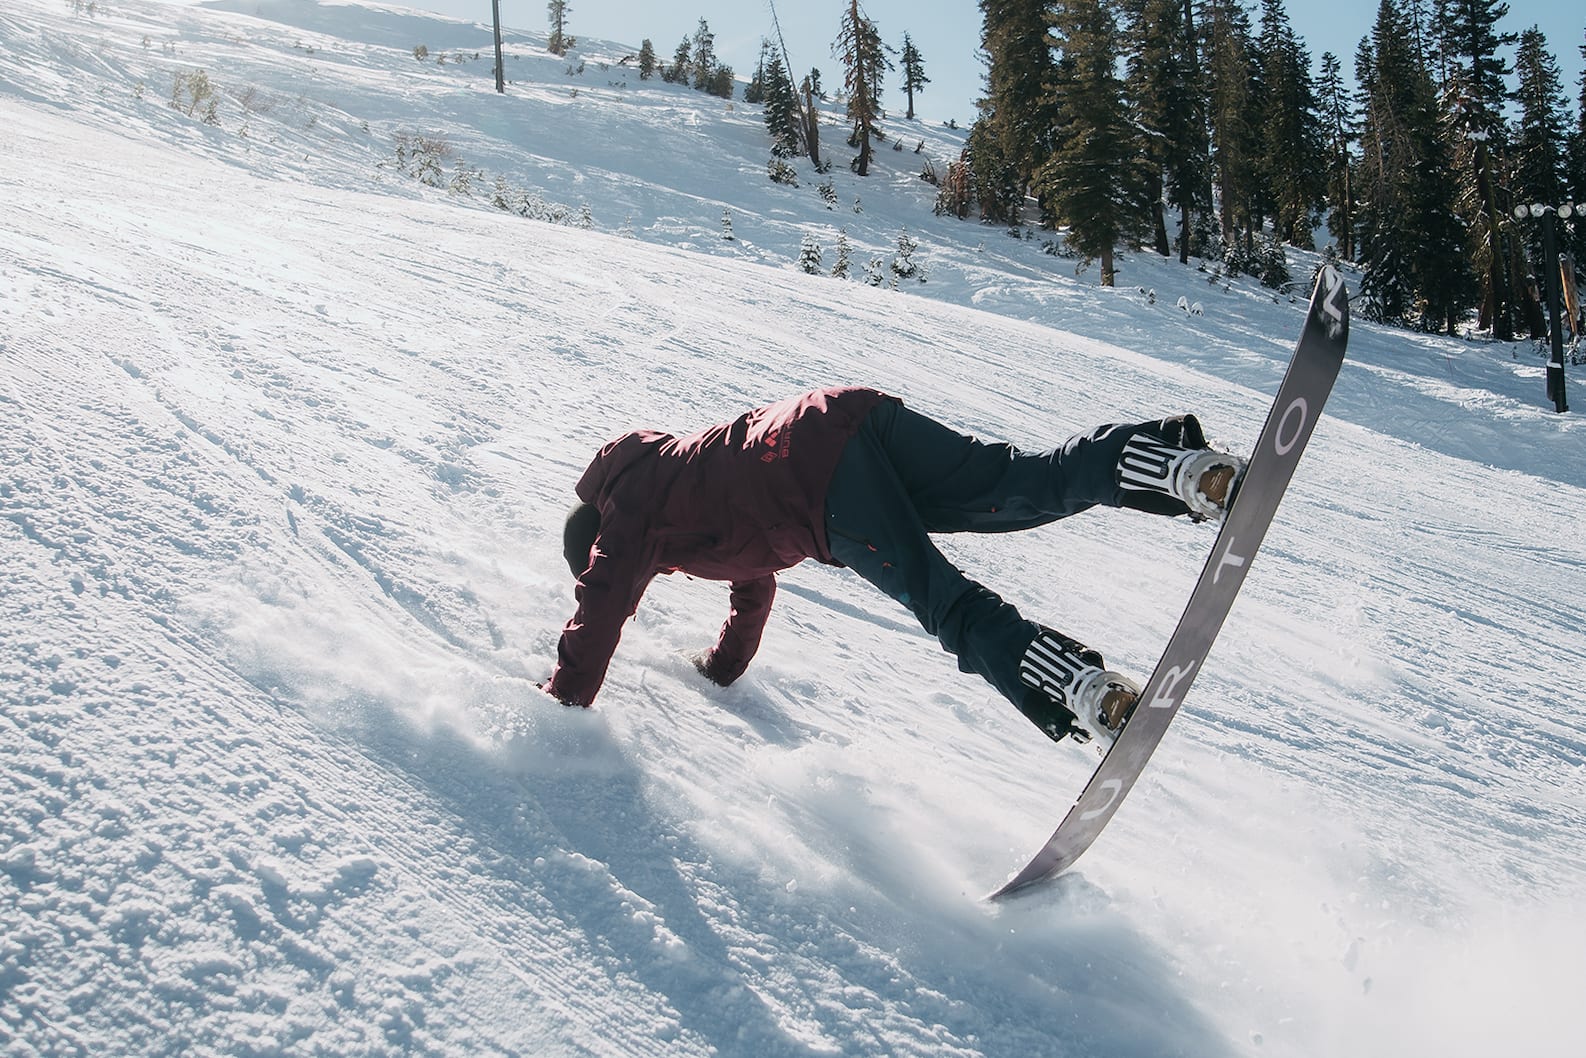 6 Snowboard Tricks to Learn Right Now | Burton Snowboards